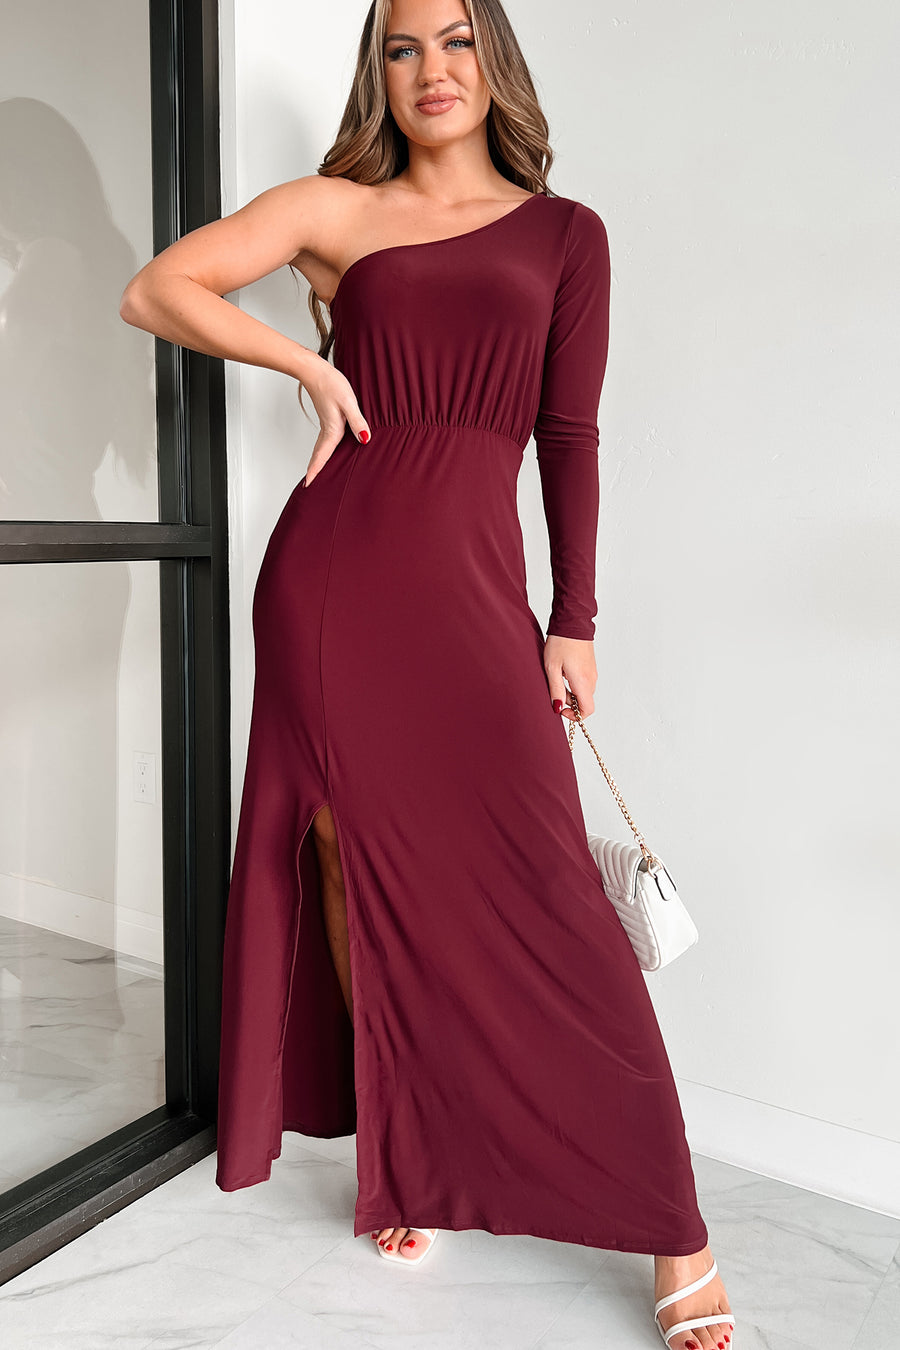 Only If It's About Me One Shoulder Maxi Dress (Burgundy) - NanaMacs